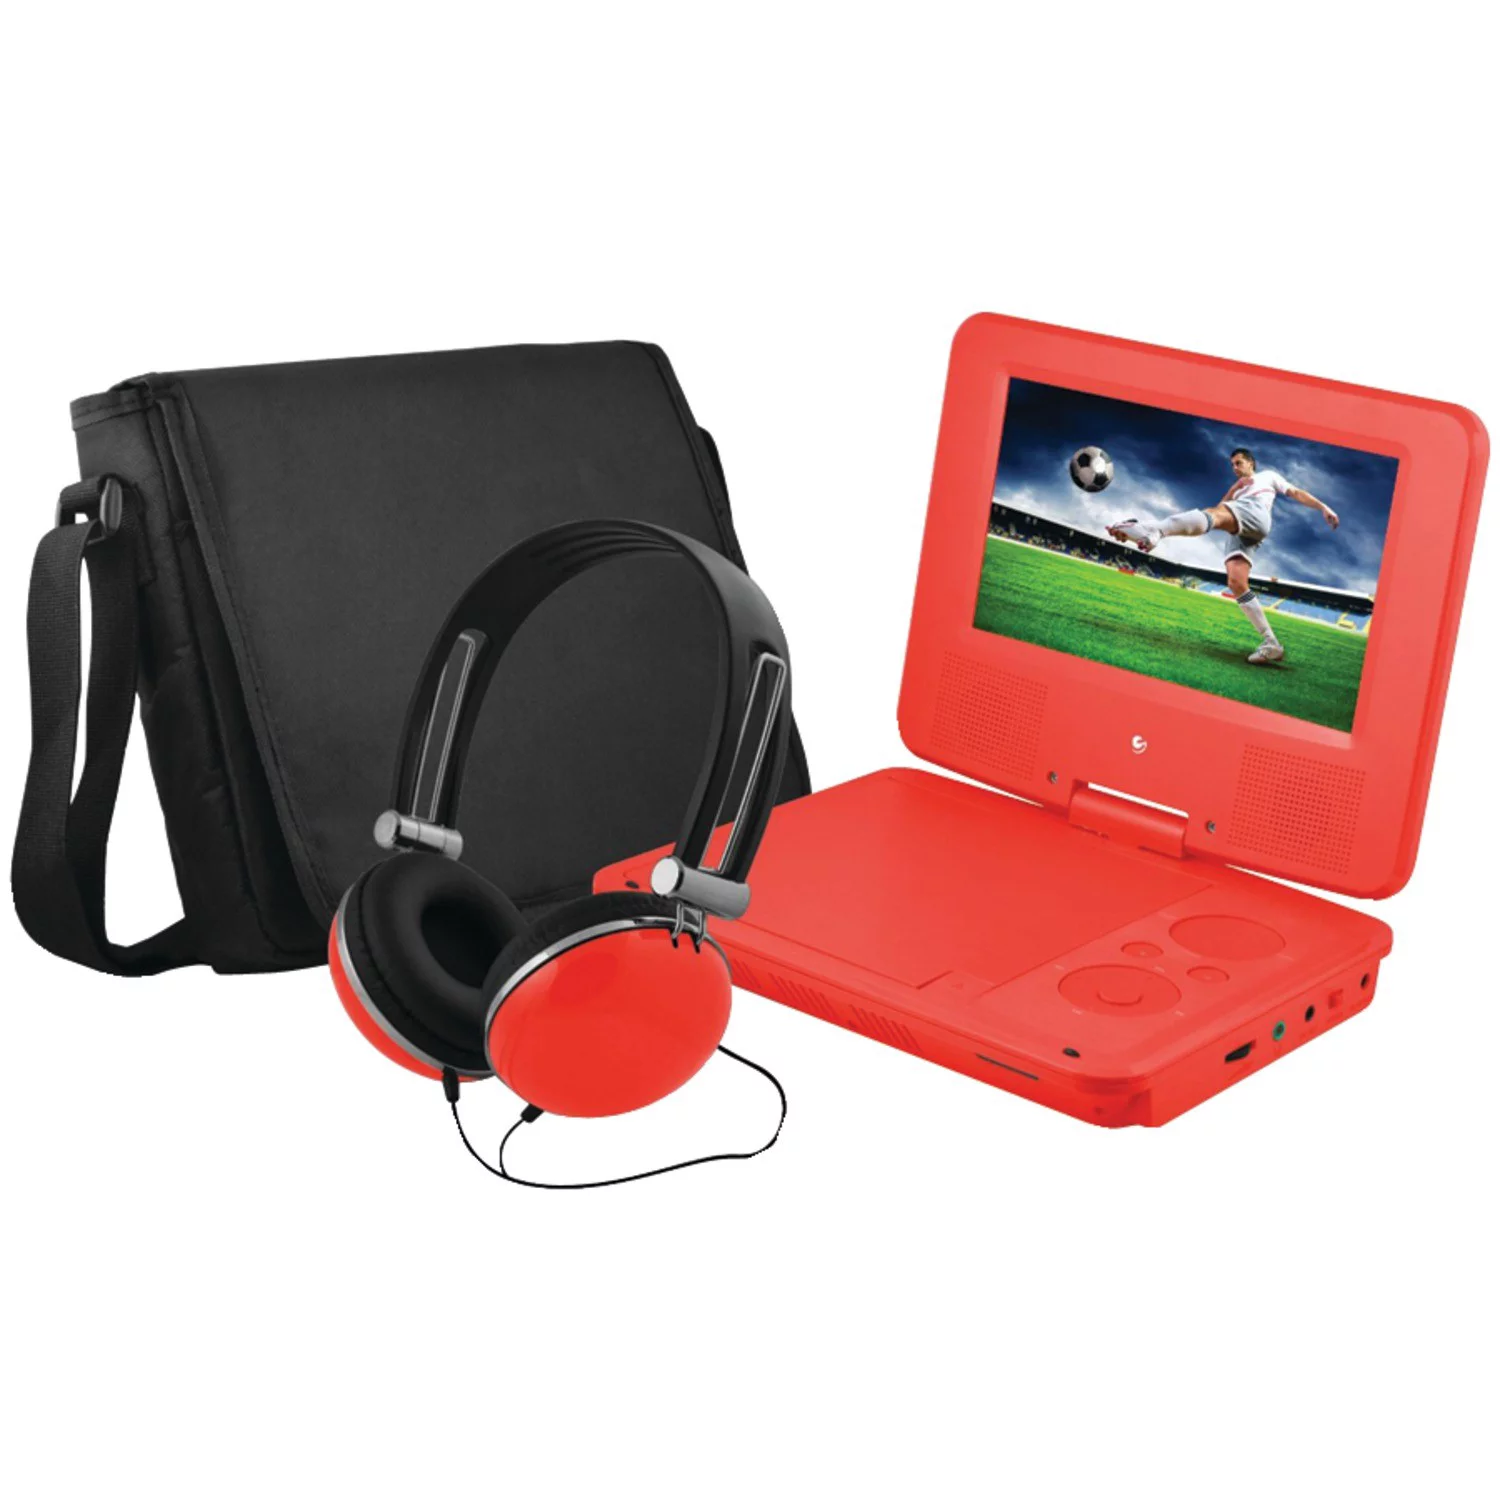 Ematic 7" Portable DVD Player with Matching Headphones and Bag - EPD707rd